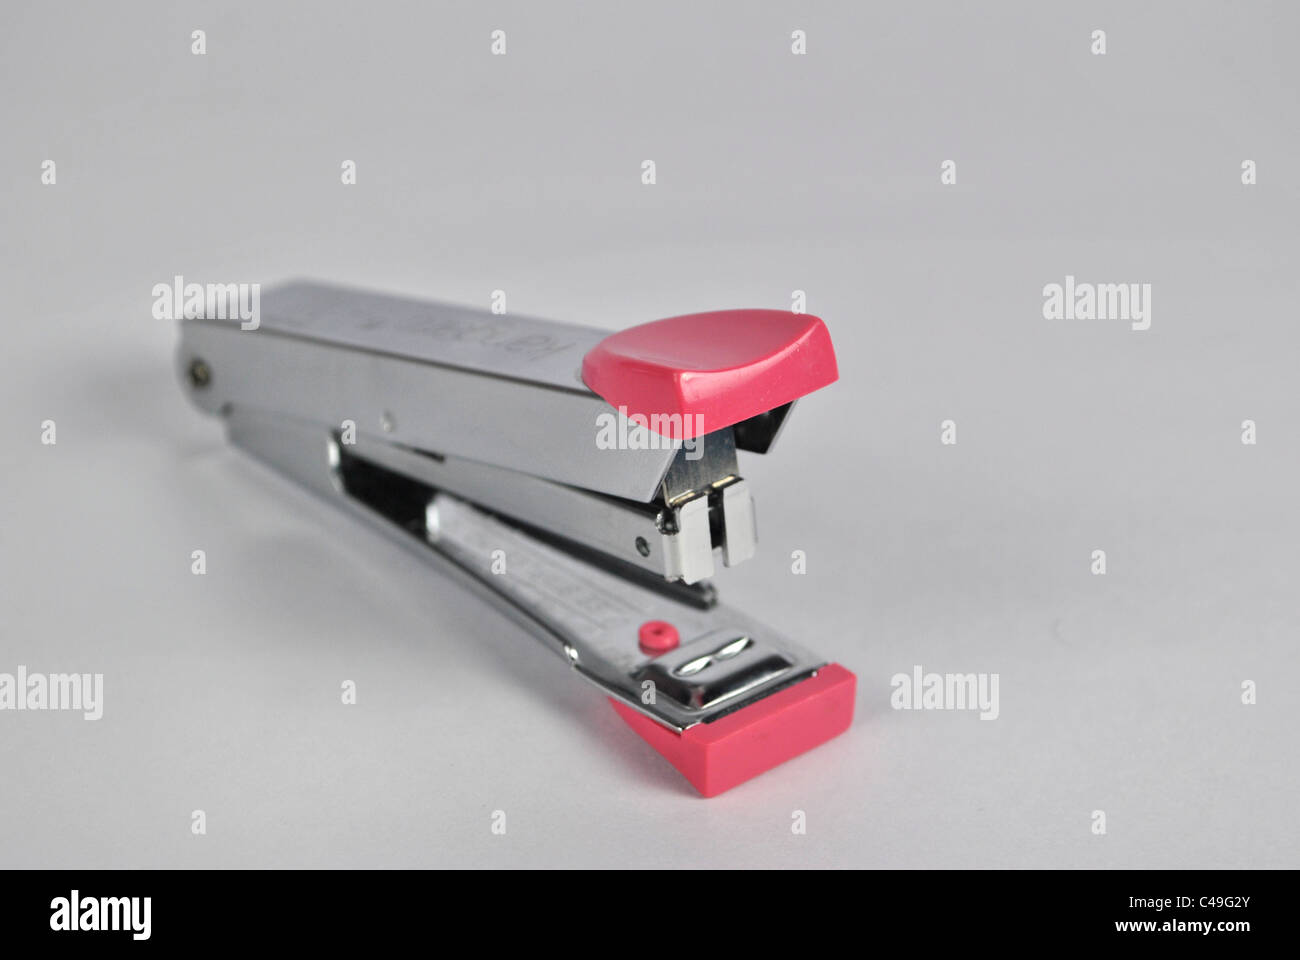 stapler office stationary pin adjoining grouping cut out cut-out silo white background metal plastic fiber shiny silver Stock Photo